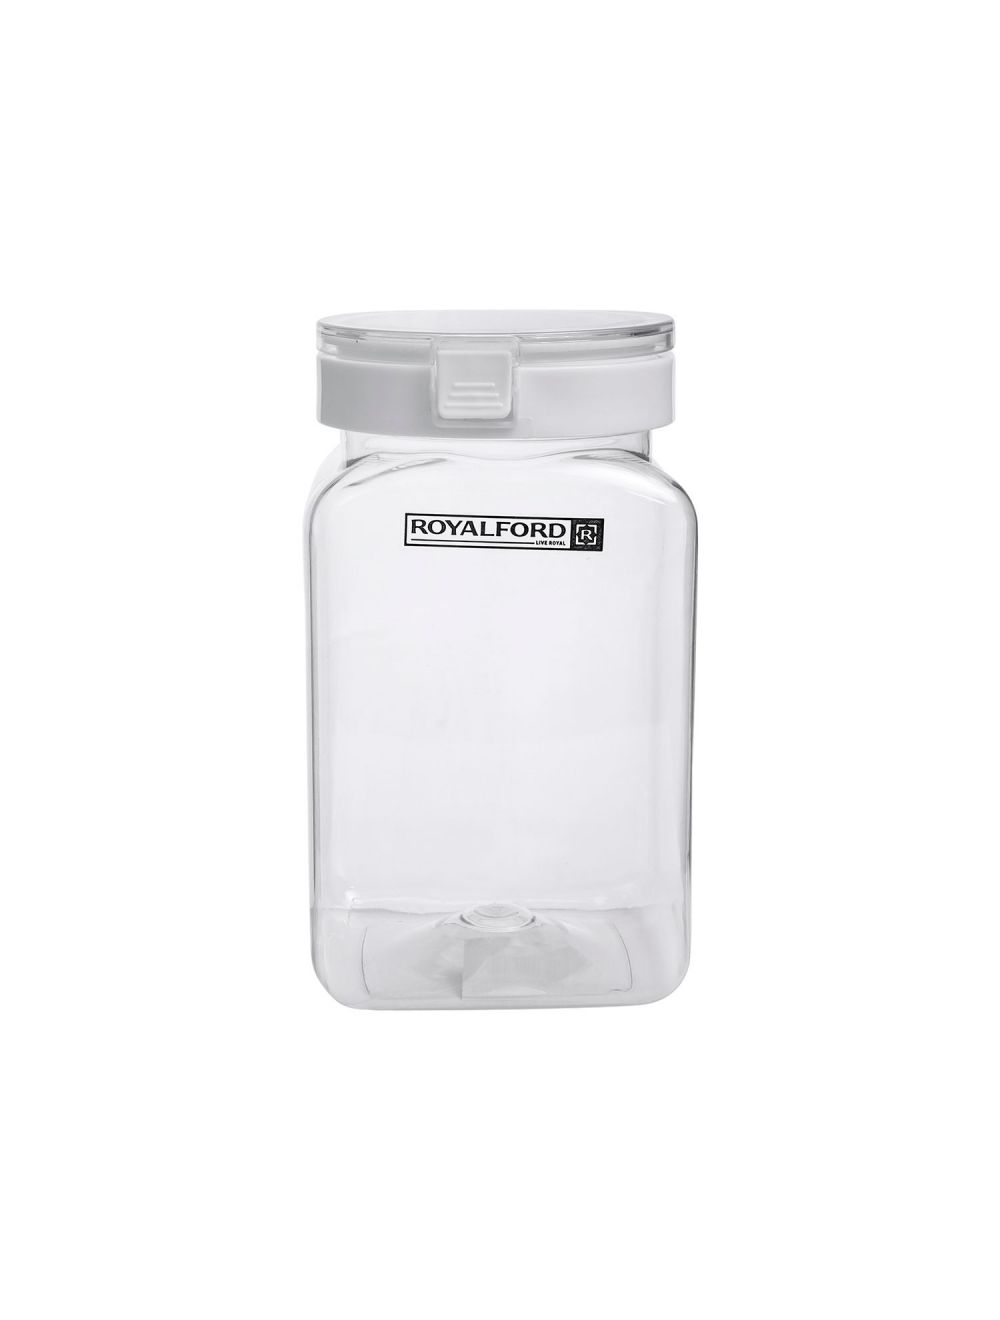 Royalford 600 ml PET Plastic Canister with Lid